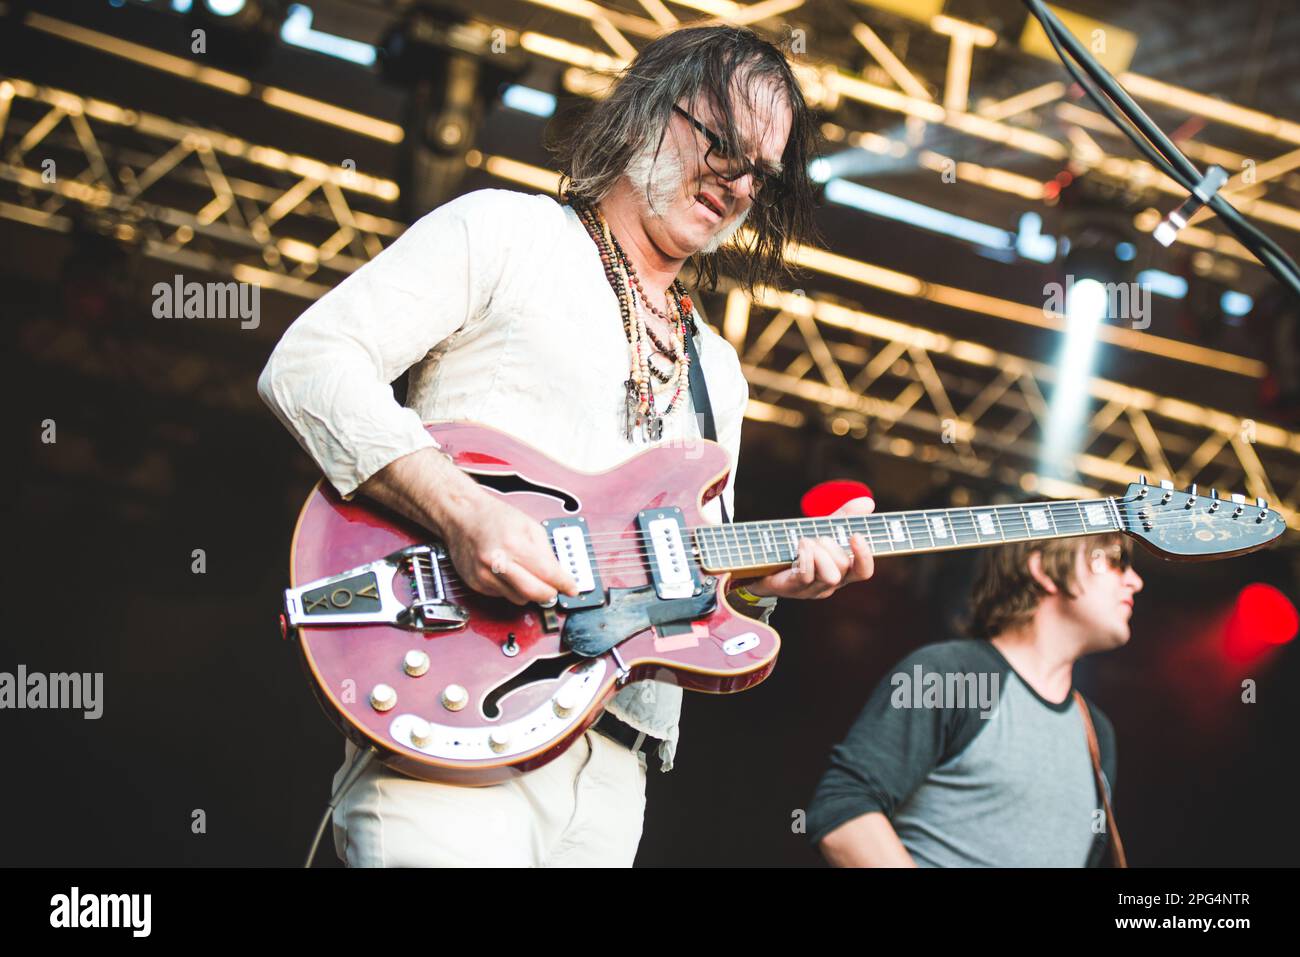 TODAYS Festival, TURIN, ITALY: Anton Newcombe, founder of the American psychedelic rock band called “The The Brian Jonestown Massacre” (BJM) performing live on stage at the Todays Festival held in Torino. Stock Photo